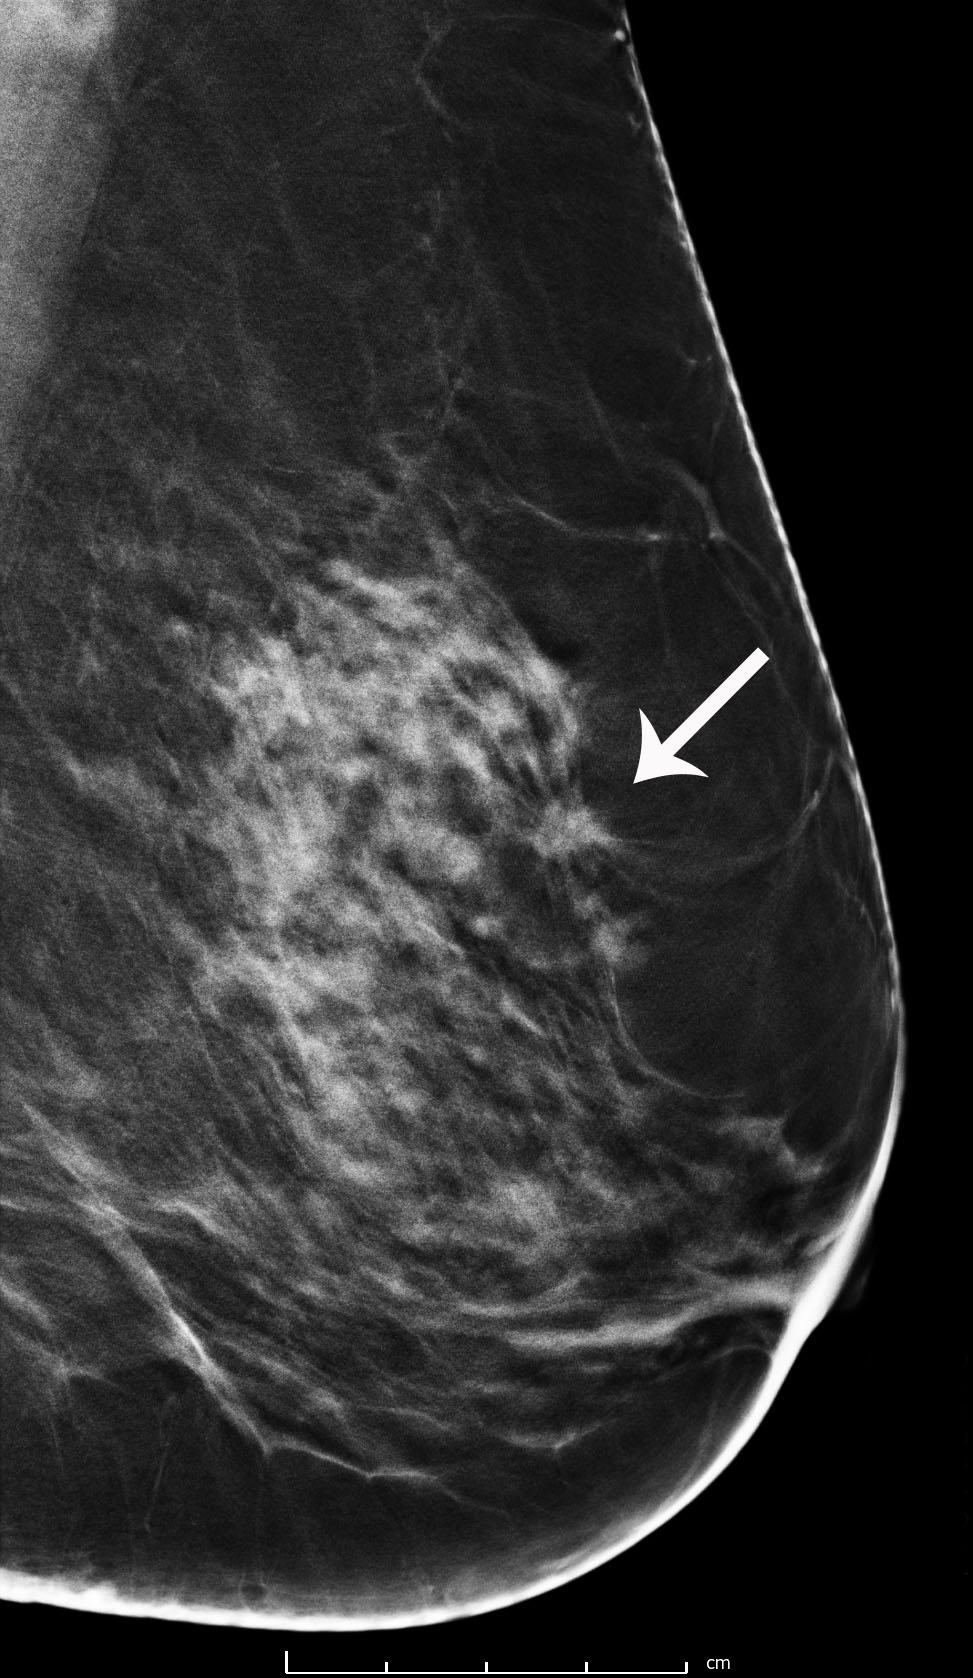 Breast Cancer Screening with 3D Mammography or Tomosynthesis  Radiology  Imaging, MA, CT